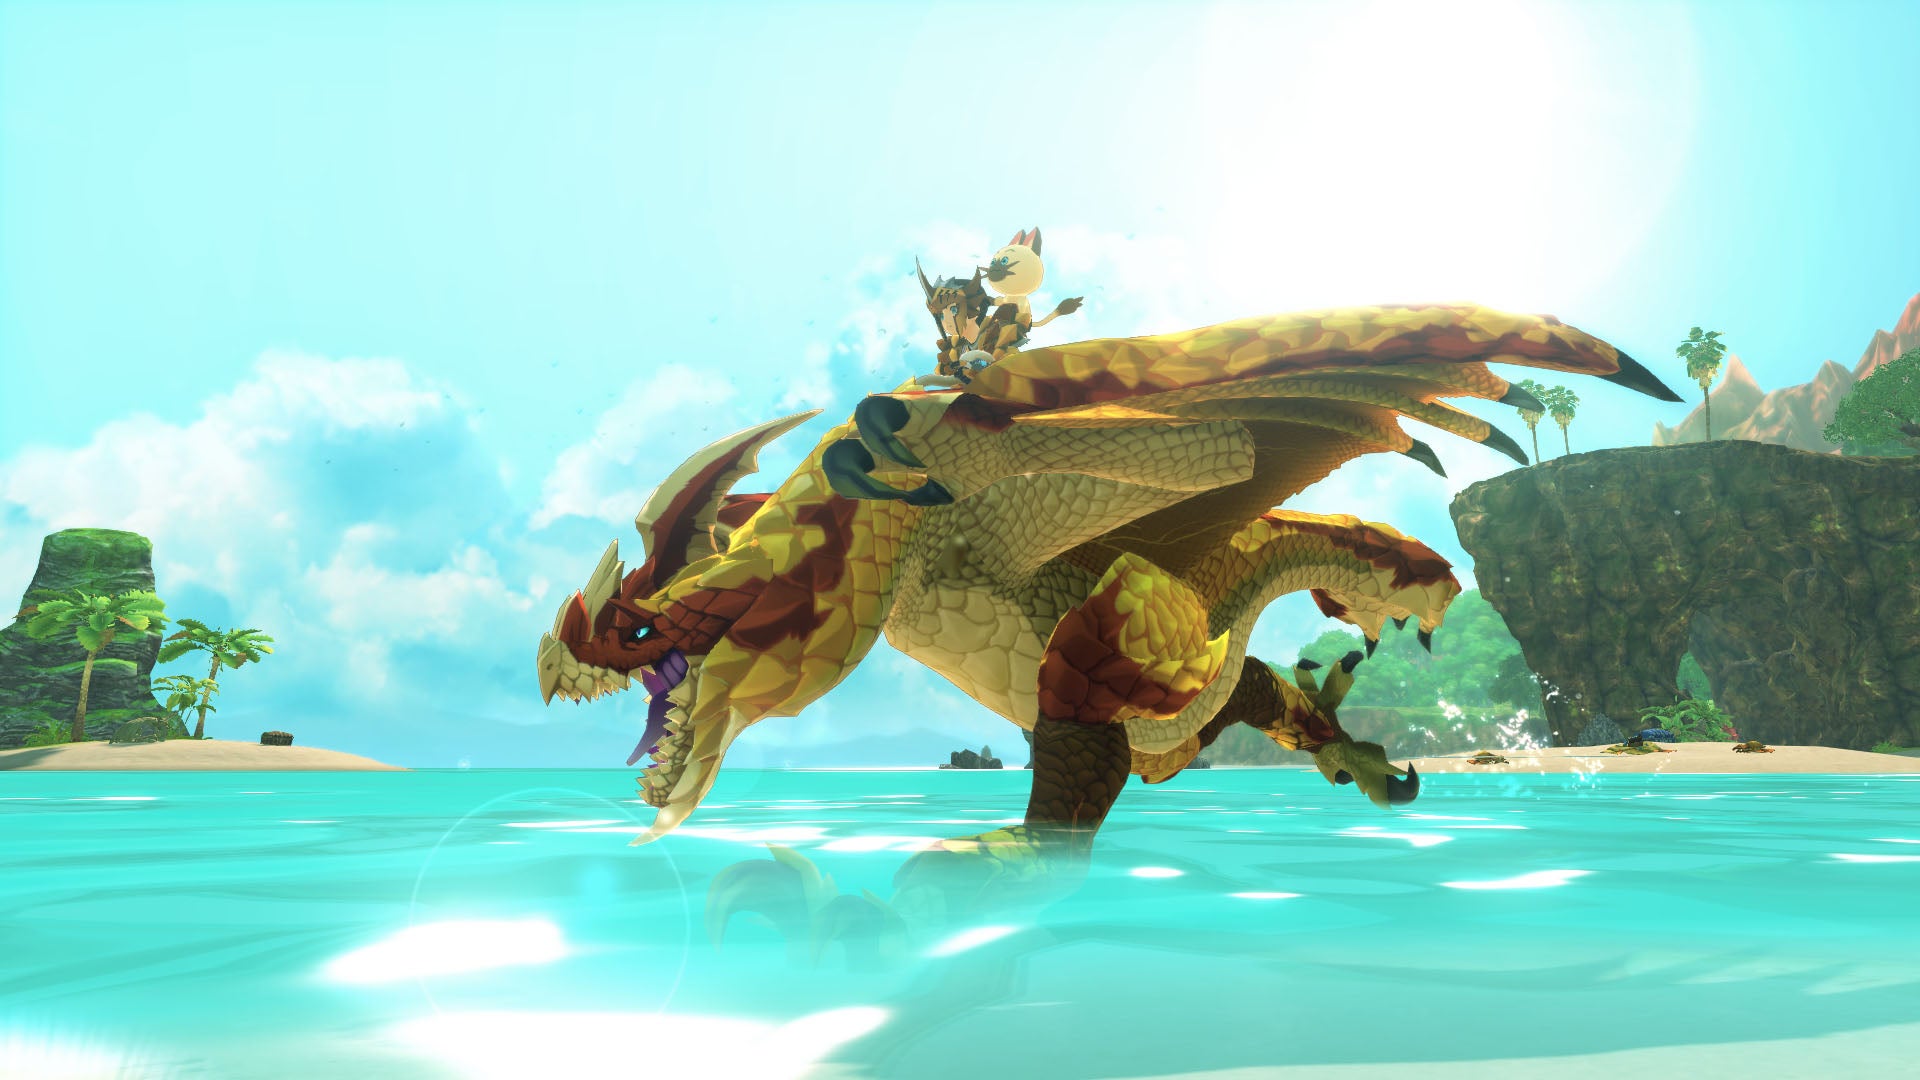 The player and their cat companion ride a dragon monster through shallow sea water in Monster Hunter Stories 2.